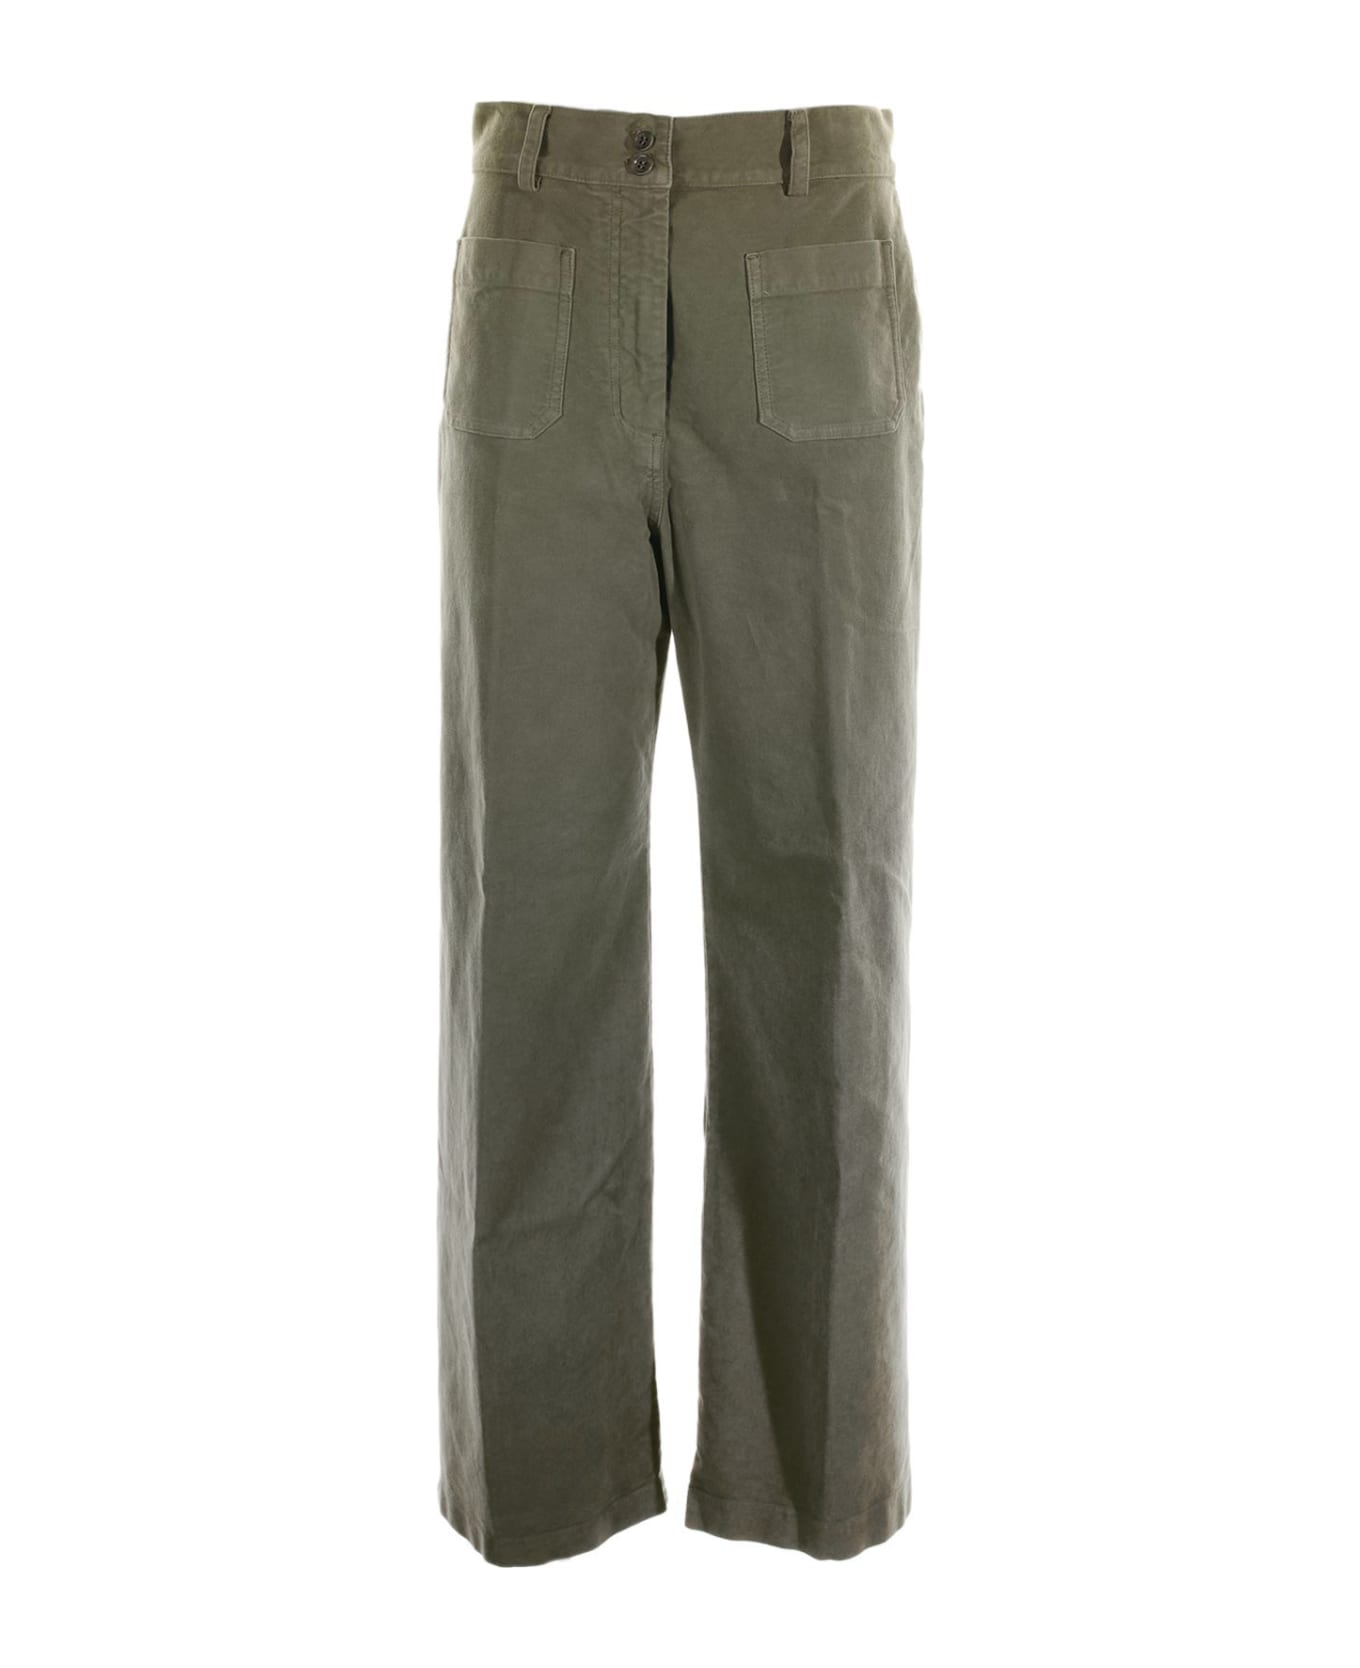 Aspesi Military Green Trousers With Pockets - MILITARE